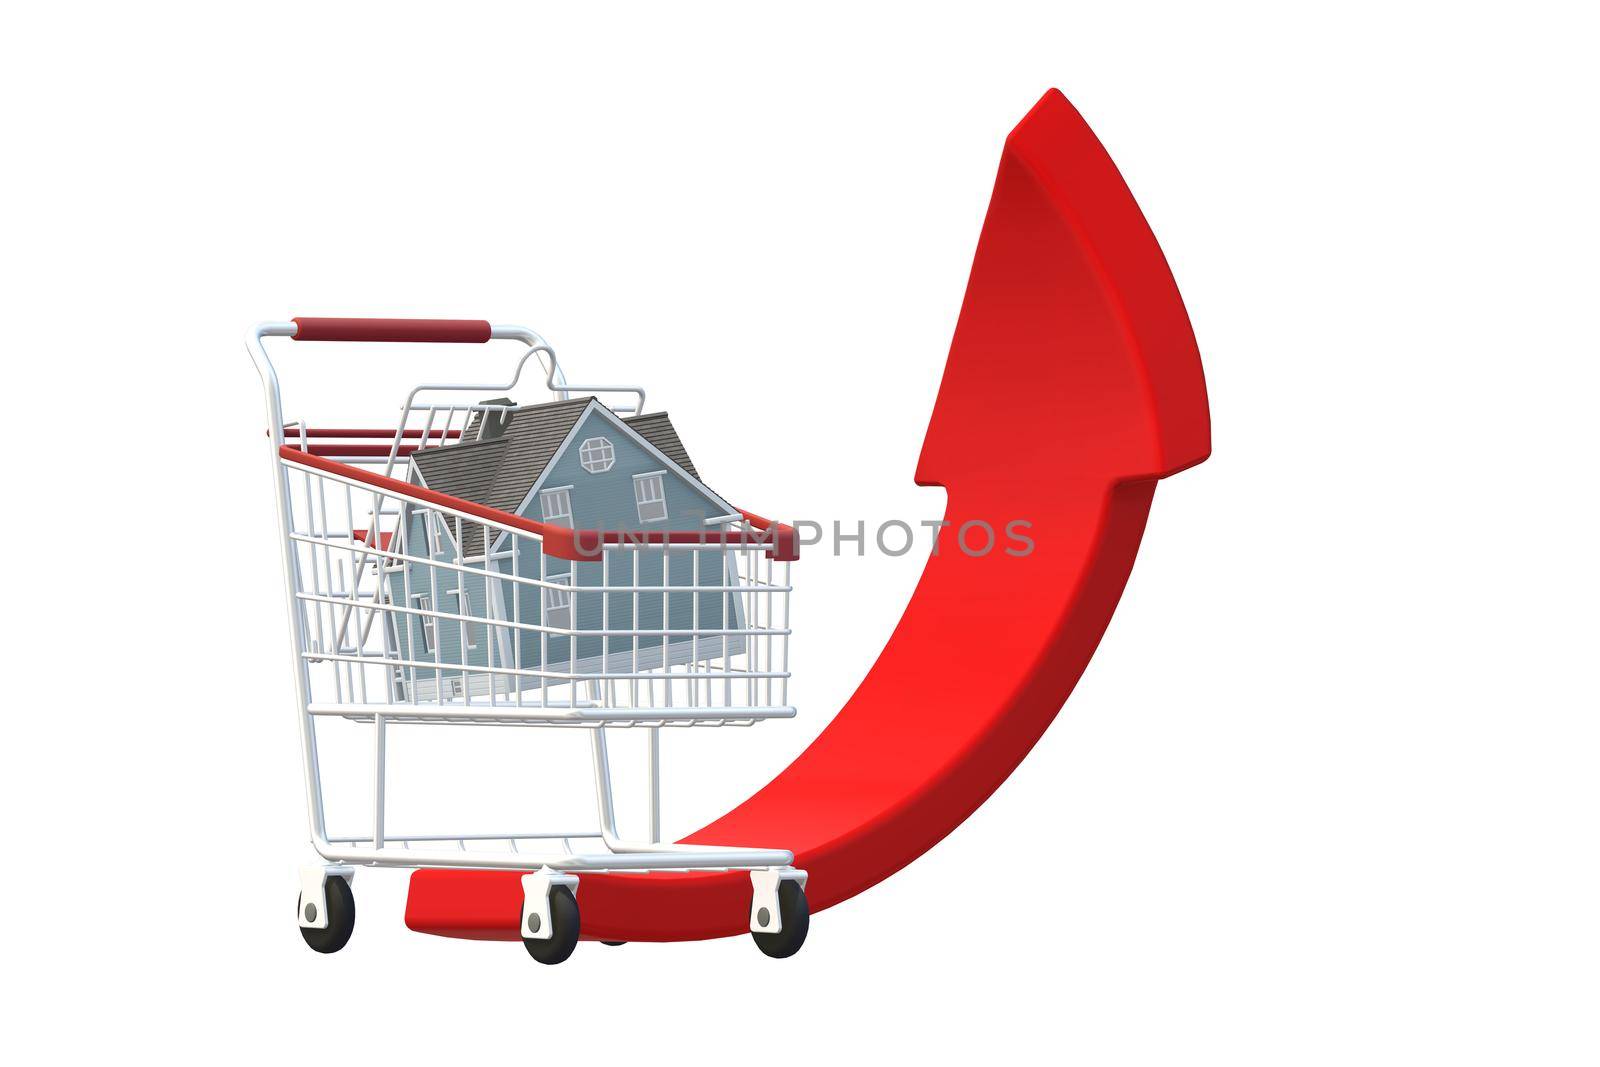 House price. Real estate growth chart. Shipping trolley, house, red rising arrow isolated on white. 3D illustration